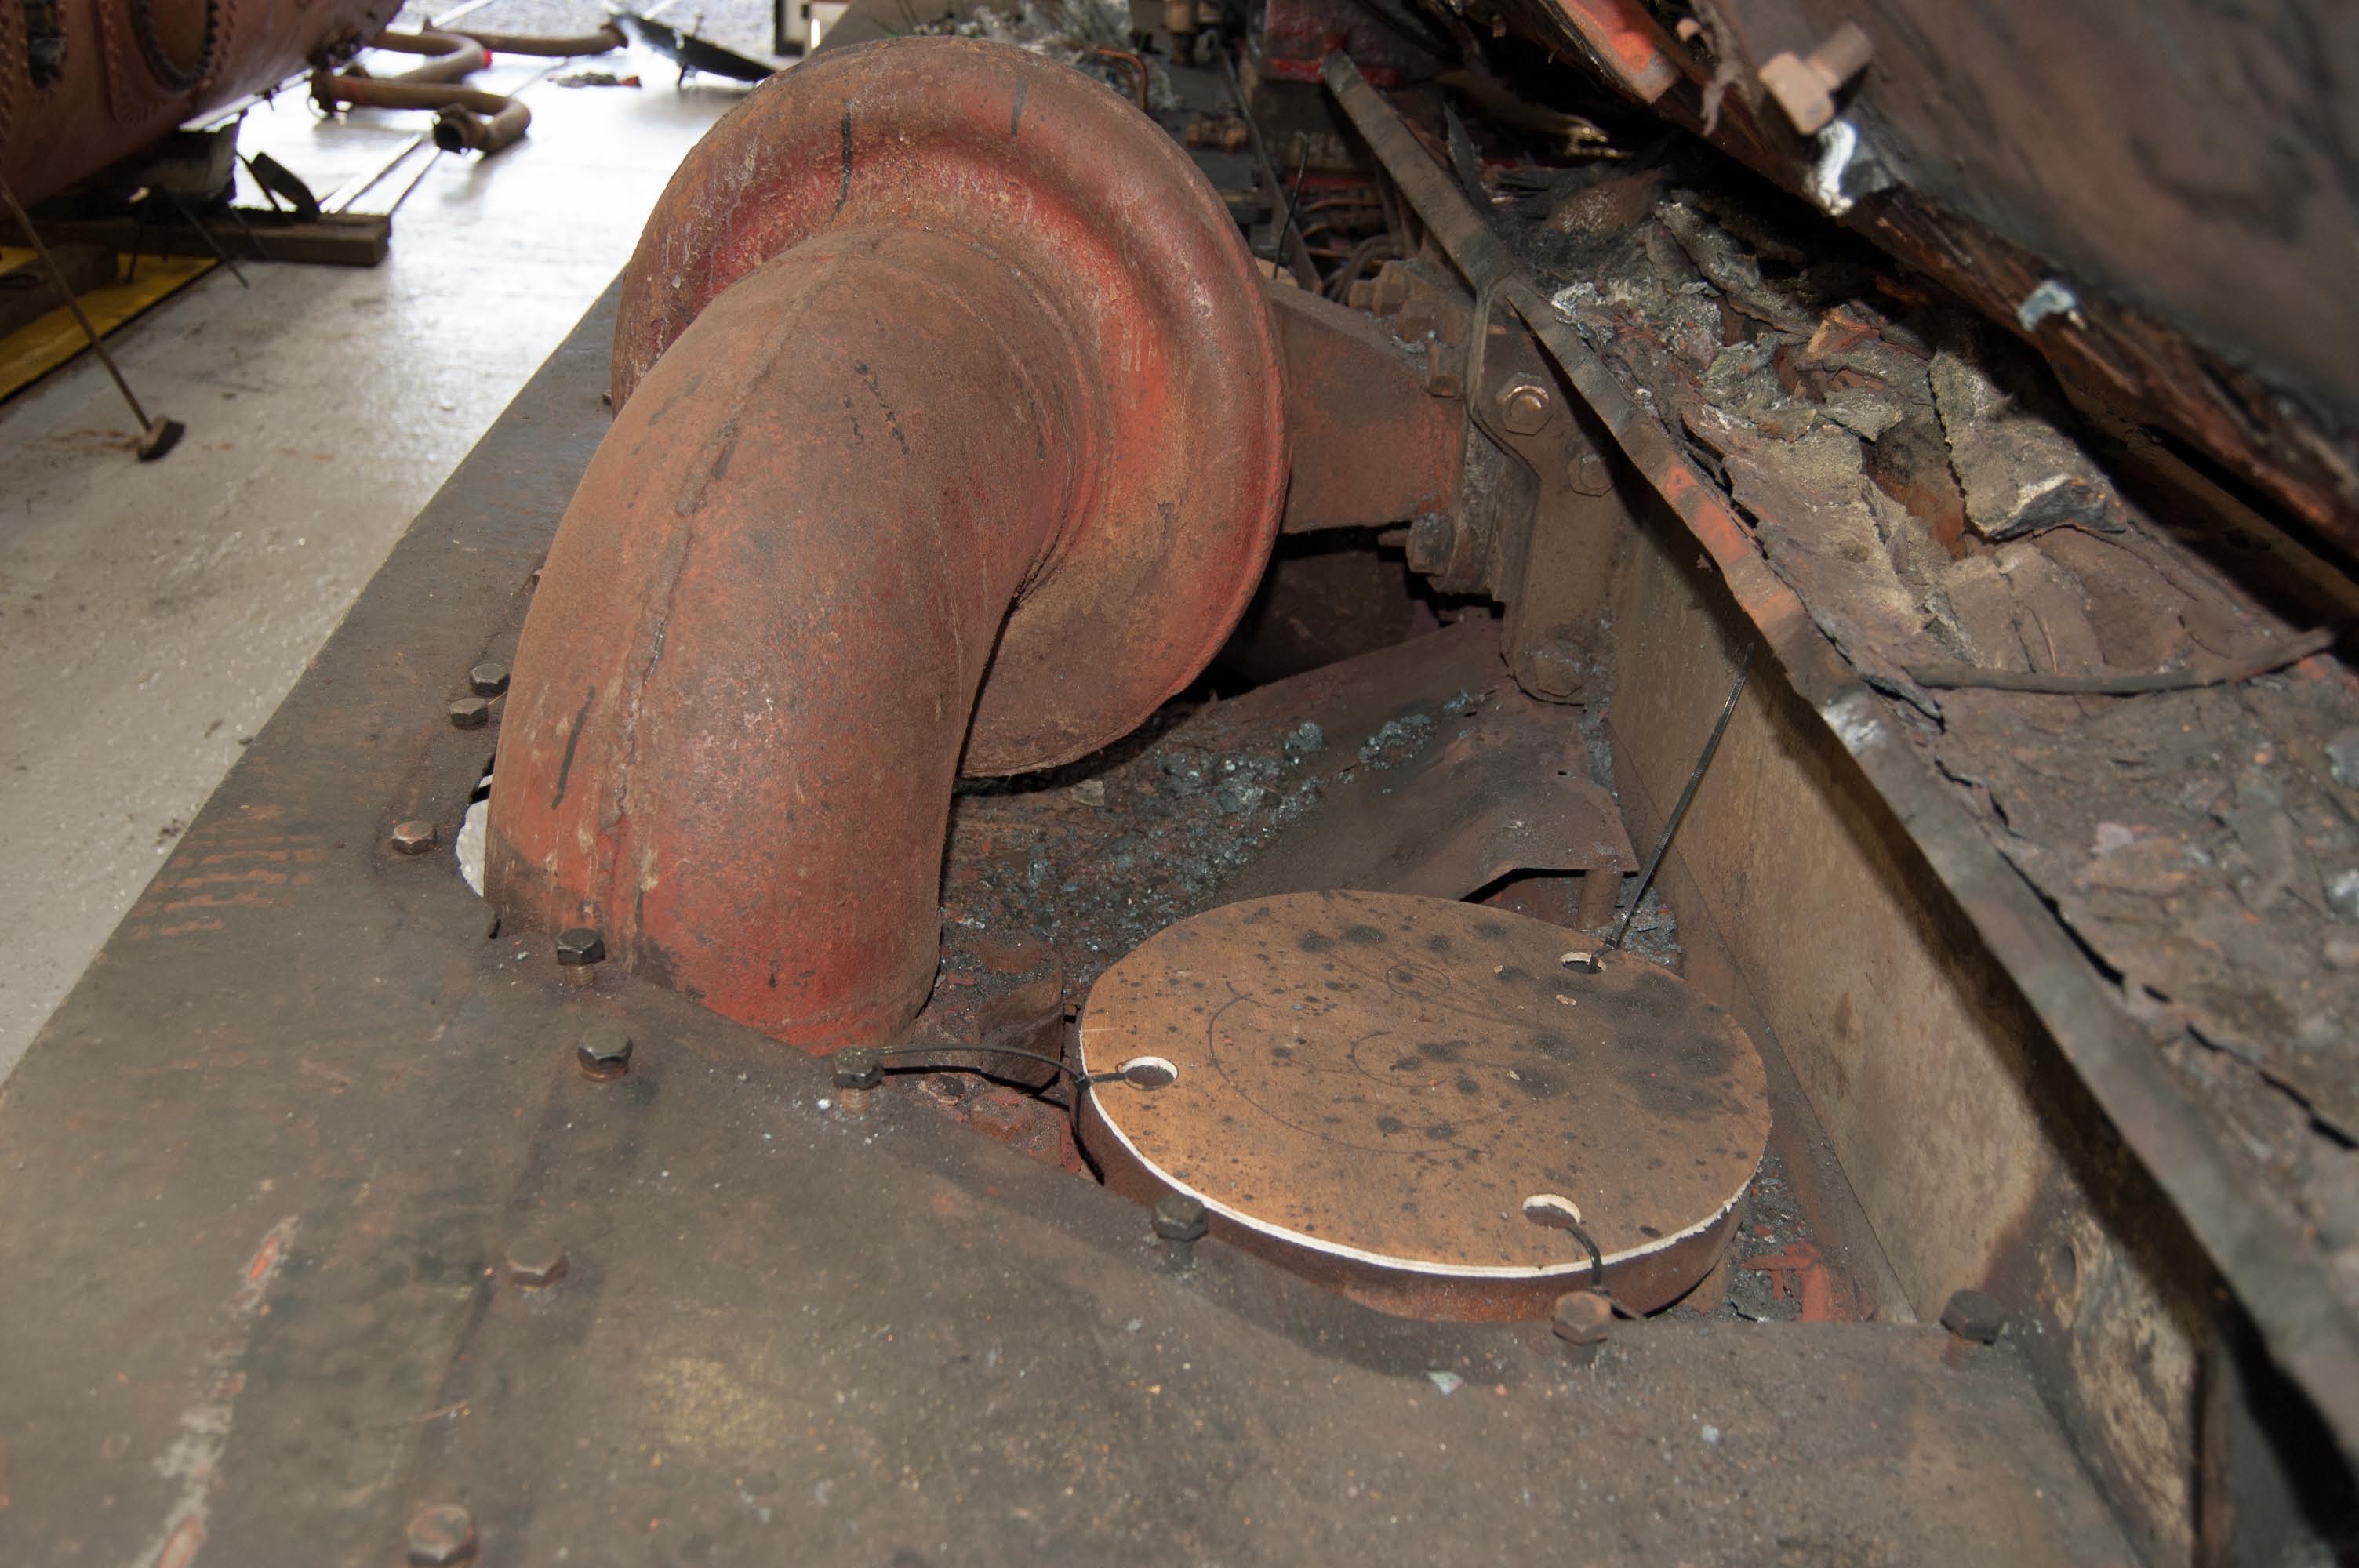 This is where the steam pipe to the fireman's side engine used to fit. The cover is to stop debris falling in, and damaging the valve.